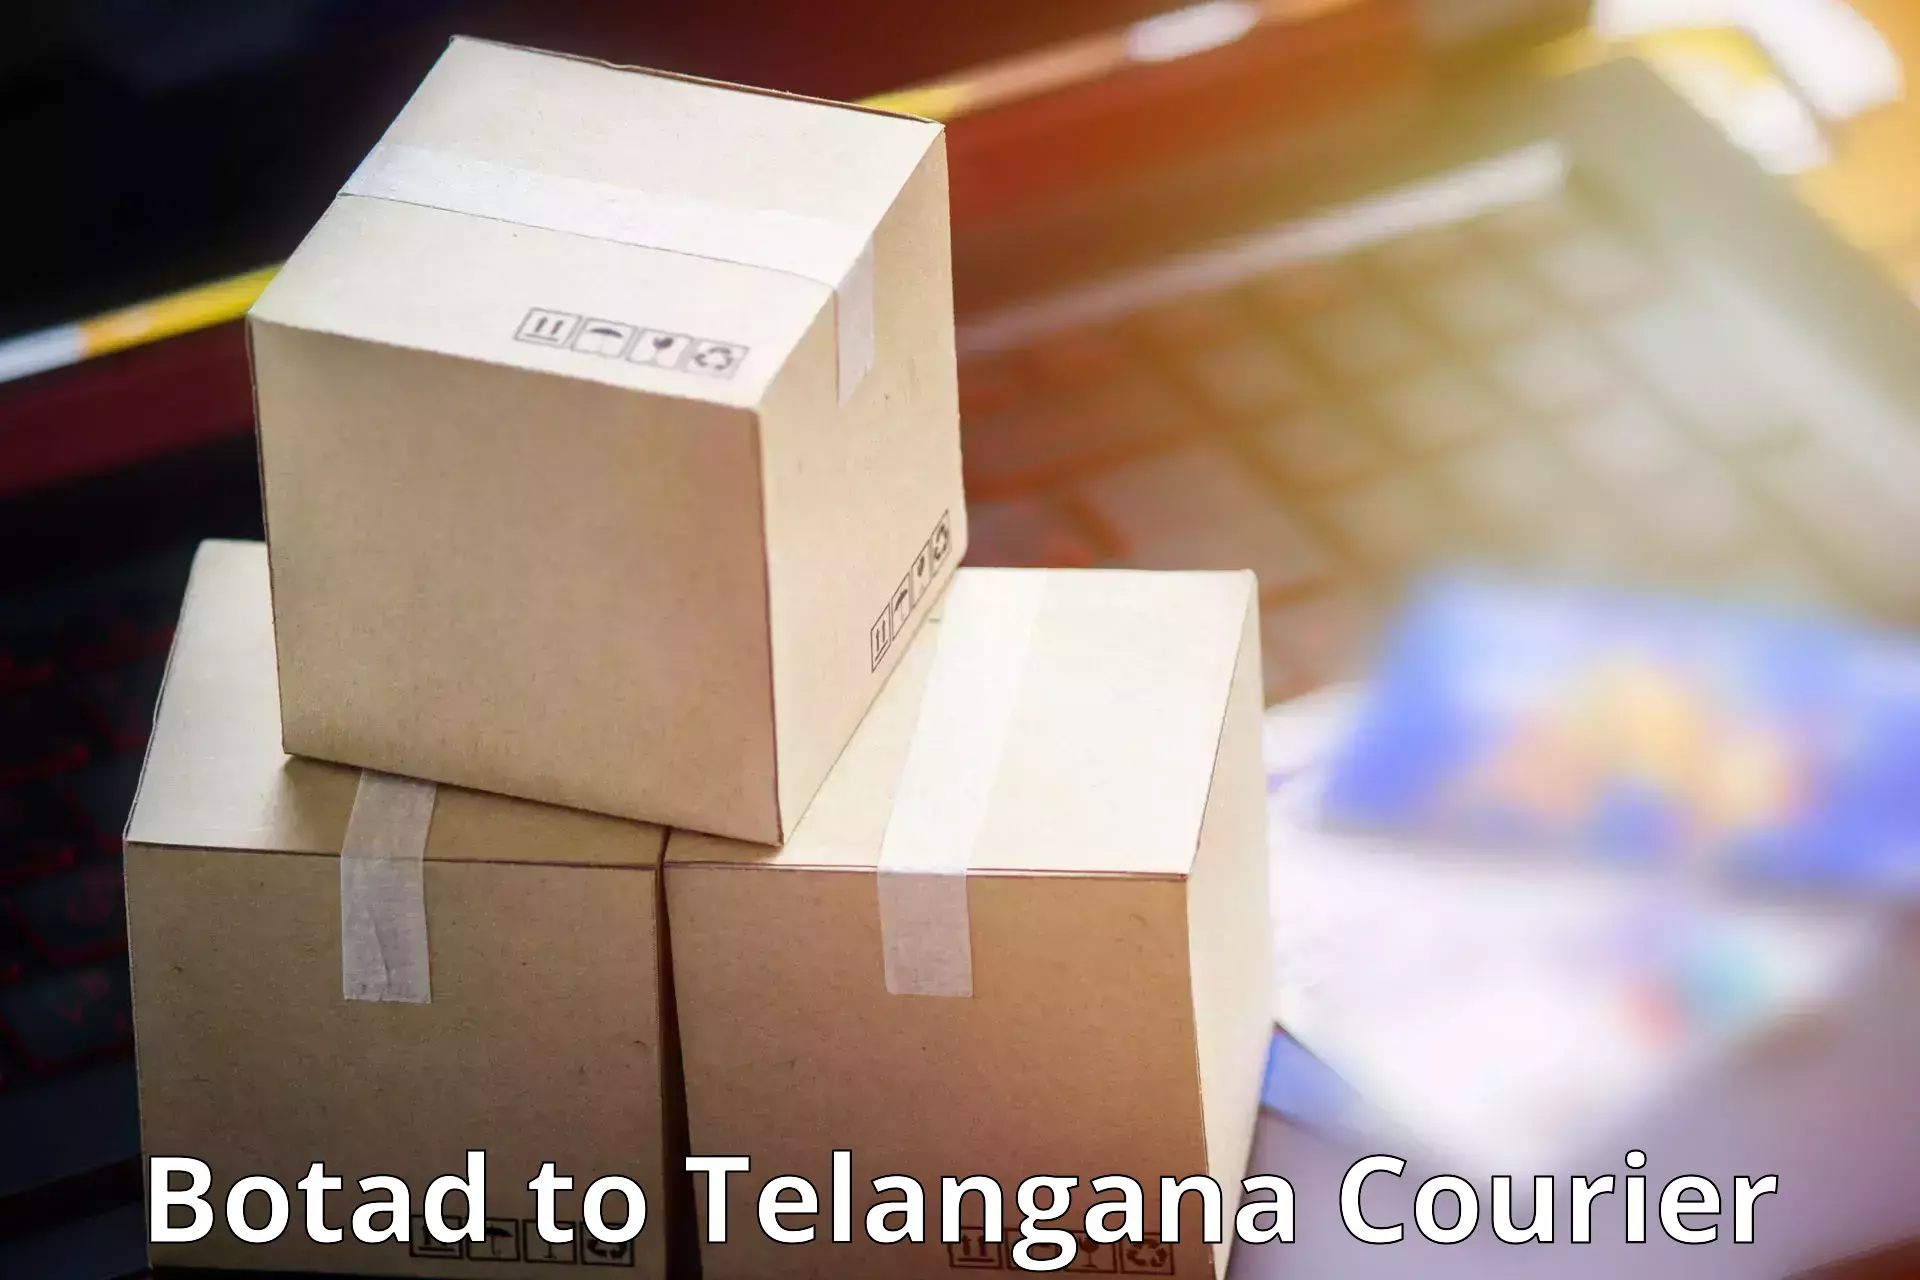 Courier service comparison in Botad to Mancherial